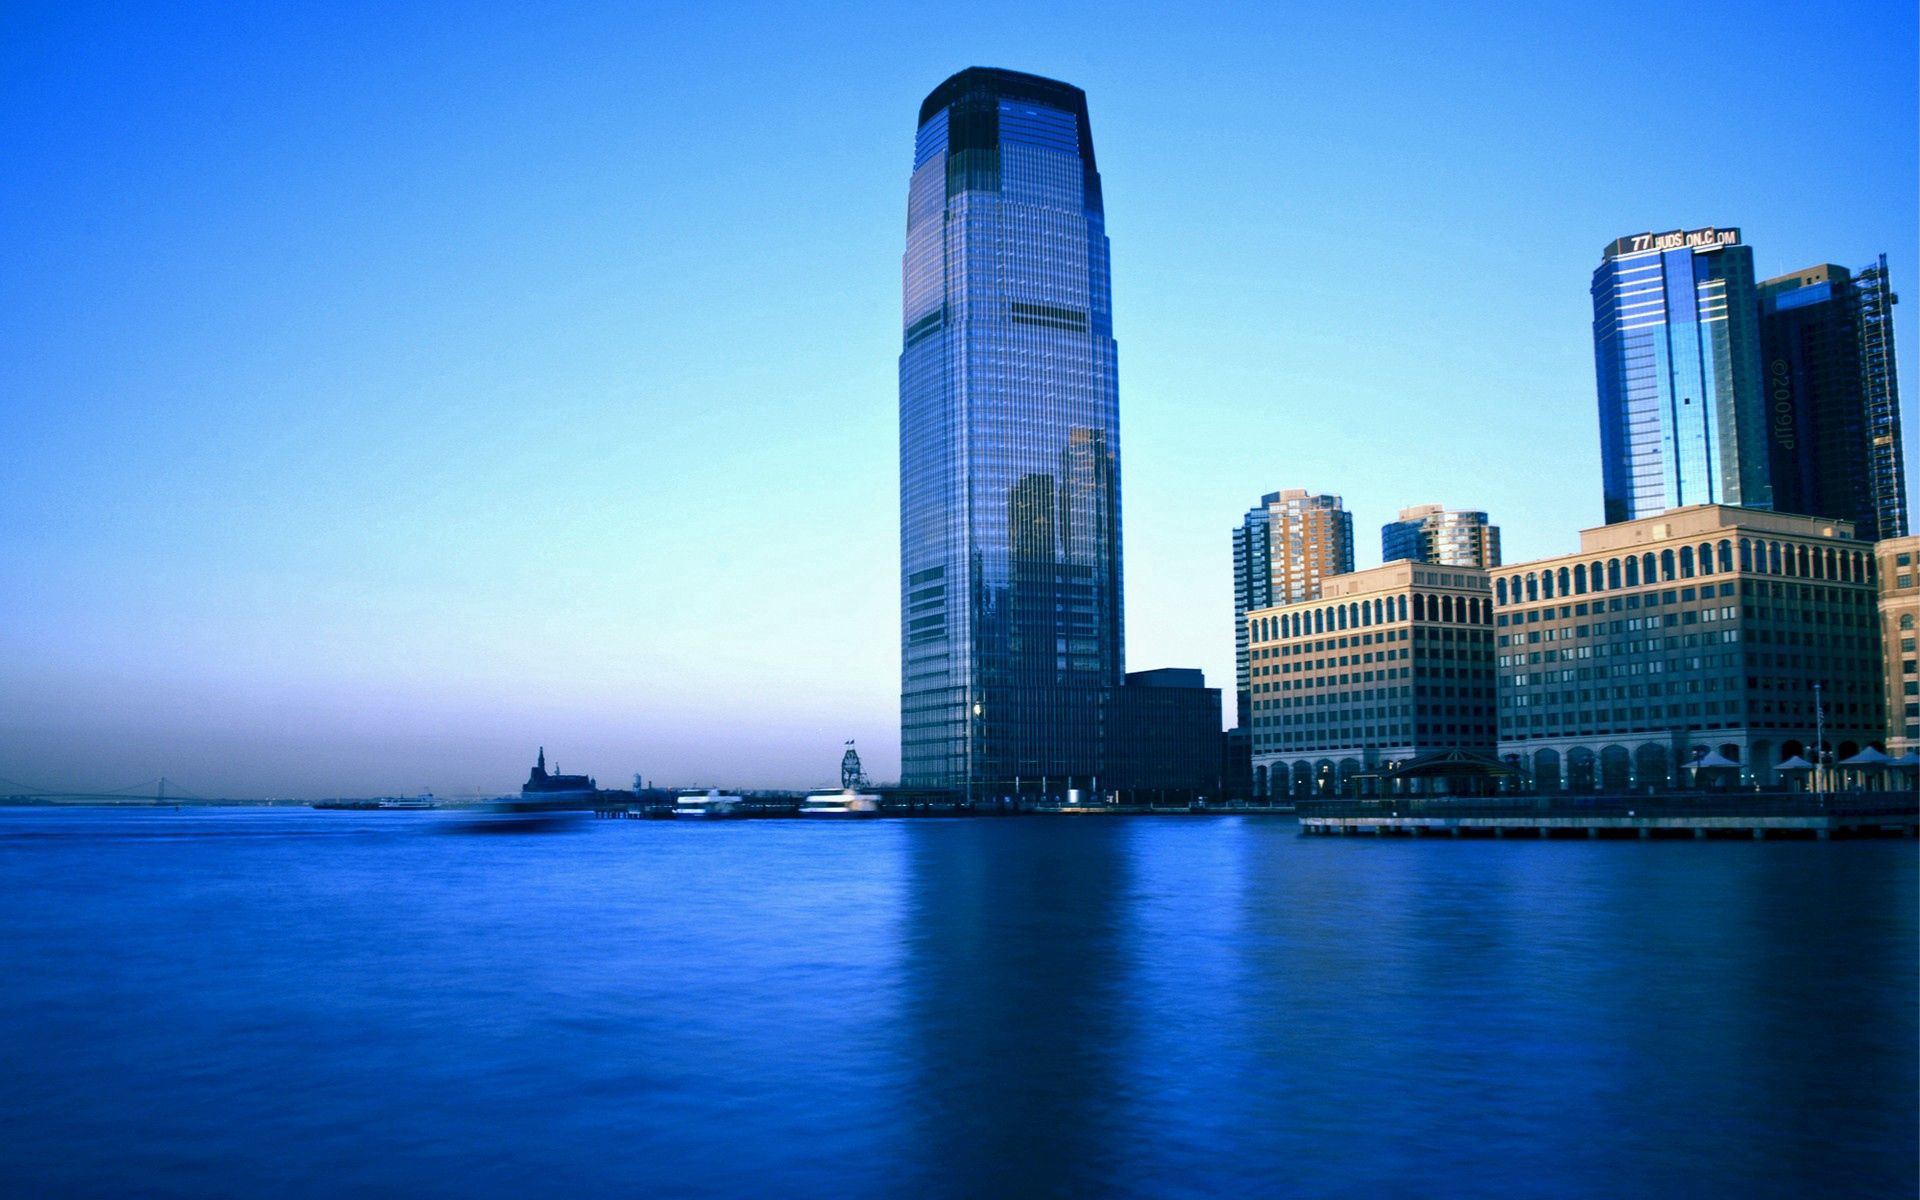 cities, rivers, building, skyscrapers, jersey city, new jersey